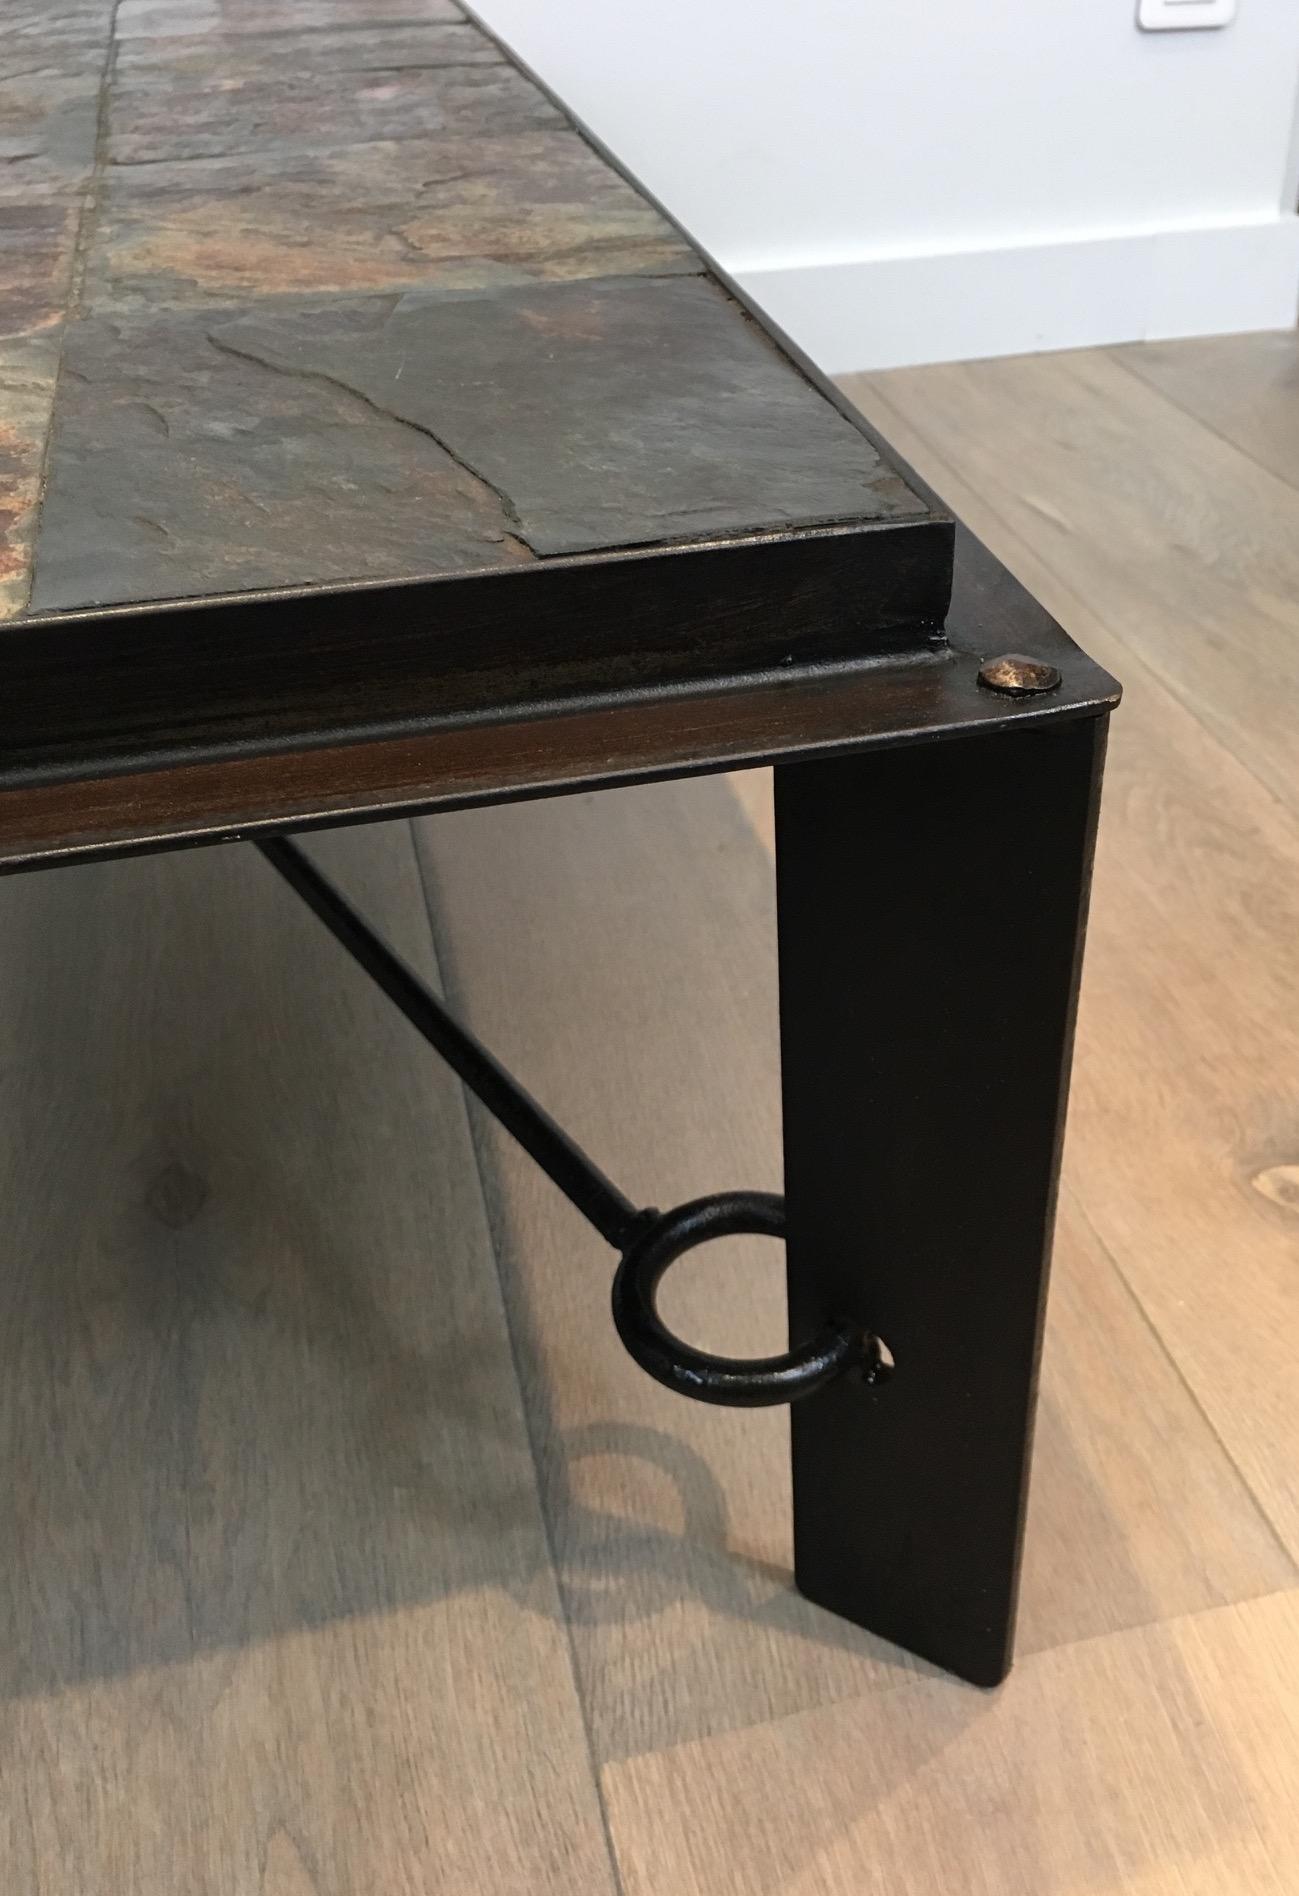 Mid-20th Century Rare Steel and Iron Coffee Table with Lava Stone Top For Sale